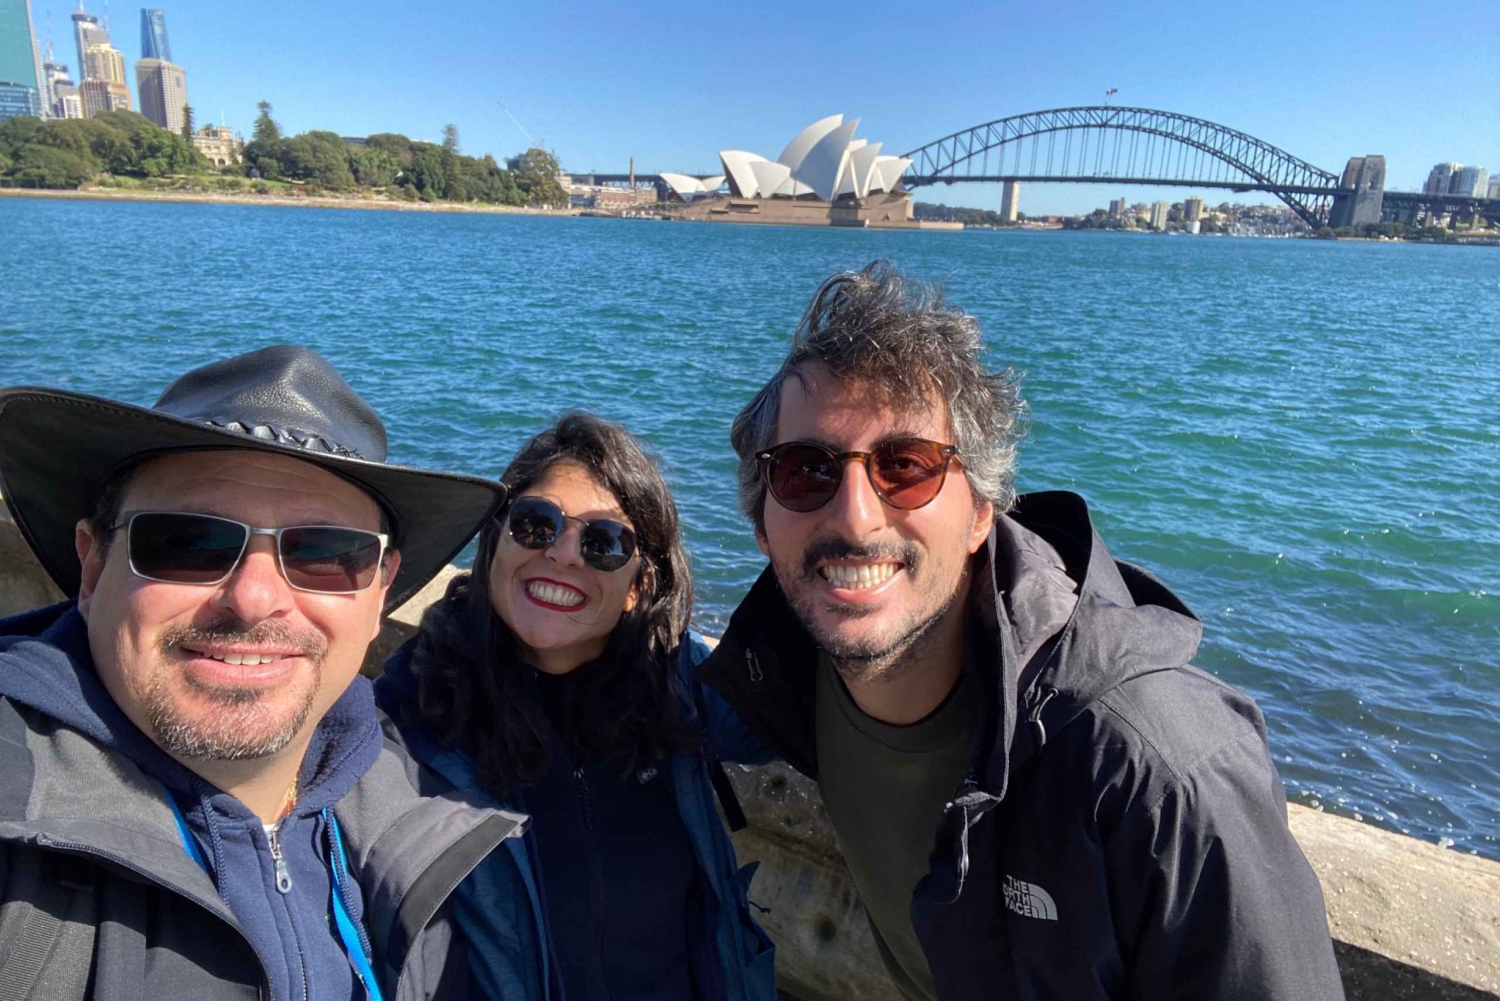 Private Full Day Sydney Sightseeing